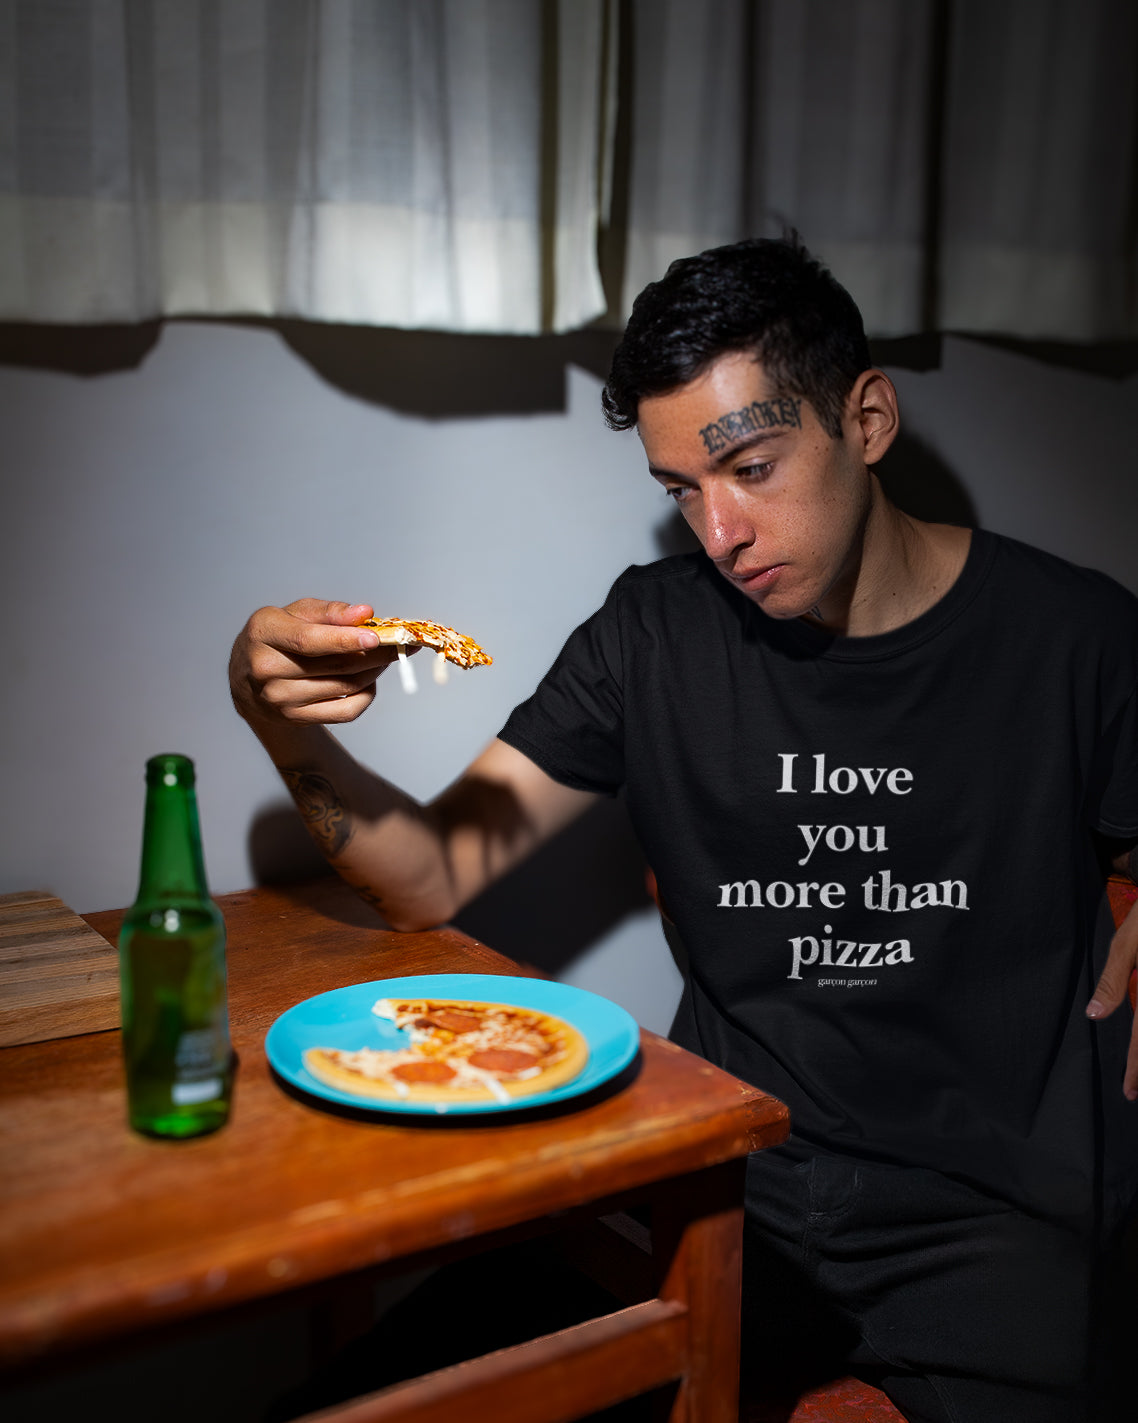 I love you more than pizza oversized t-shirt. A person seated at a wooden table, wearing a black t-shirt with the phrase "I love you more than pizza" written in white. They are glancing down, thoughtfully, at a slice of pizza in their hand. A partially eaten pizza sits on a blue plate, and a green bottle is to the side, against a backdrop of a dimly lit room with a window dressed in white curtains.